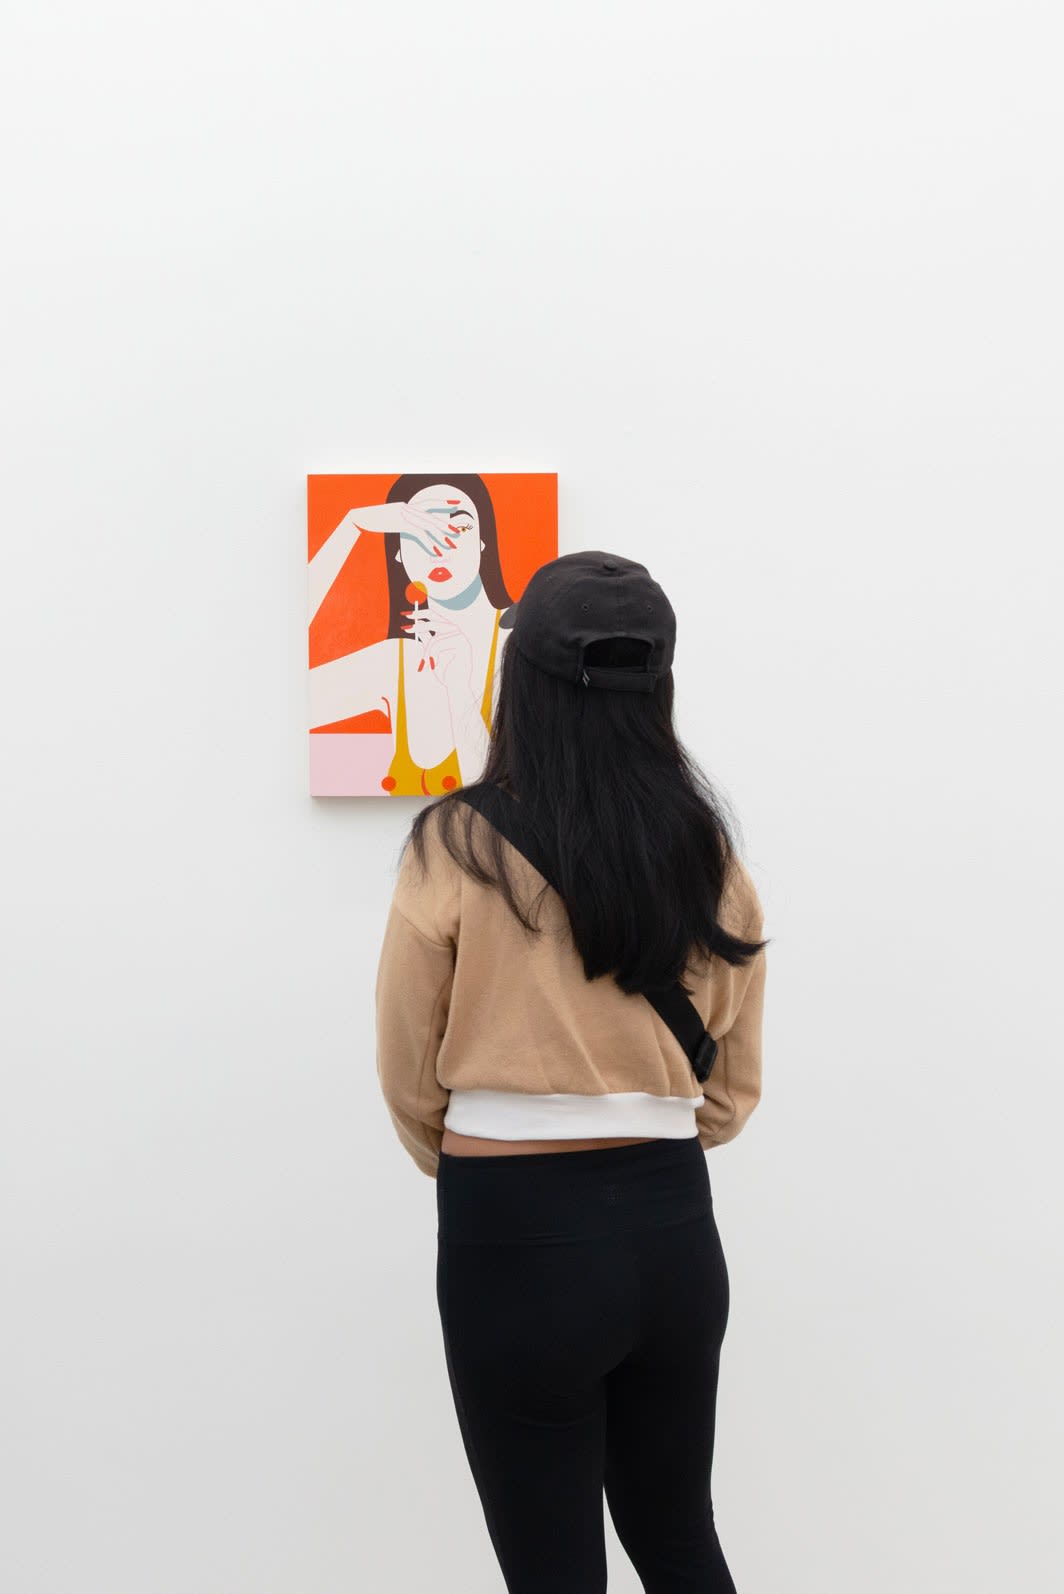 Photo of person looking at Jillian Evelyn's Sucker painting 